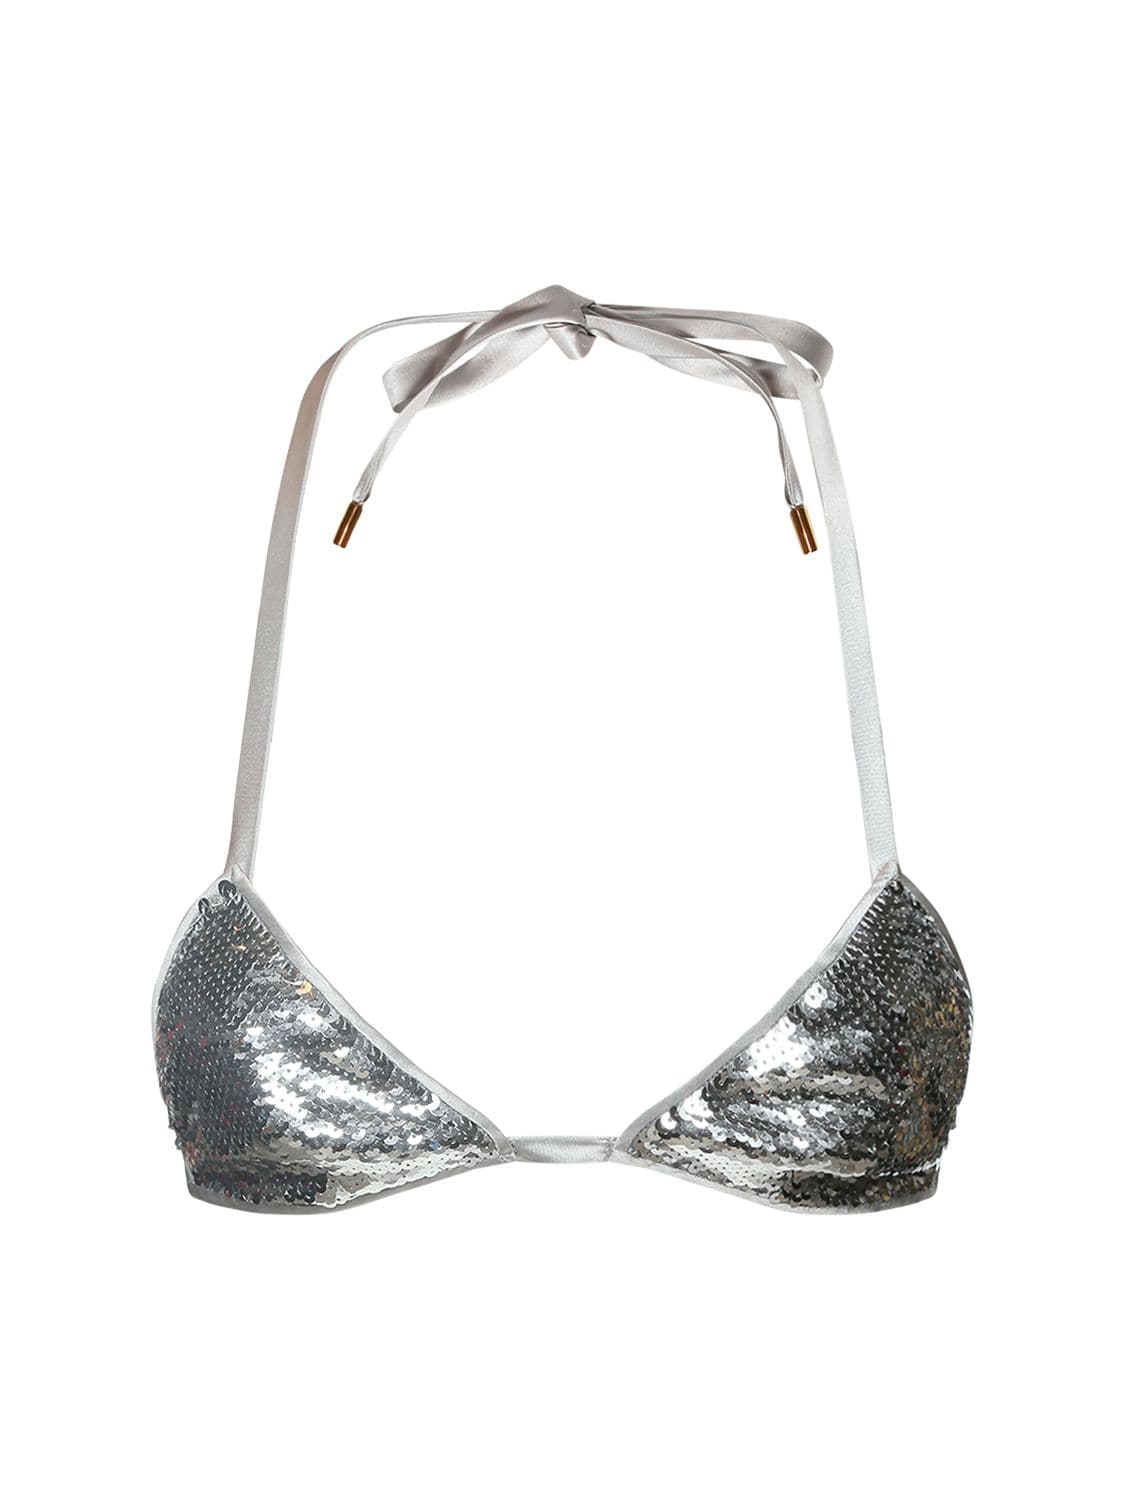 TOM FORD Liquid Sequins & Satin Triangle Bra Top for Women